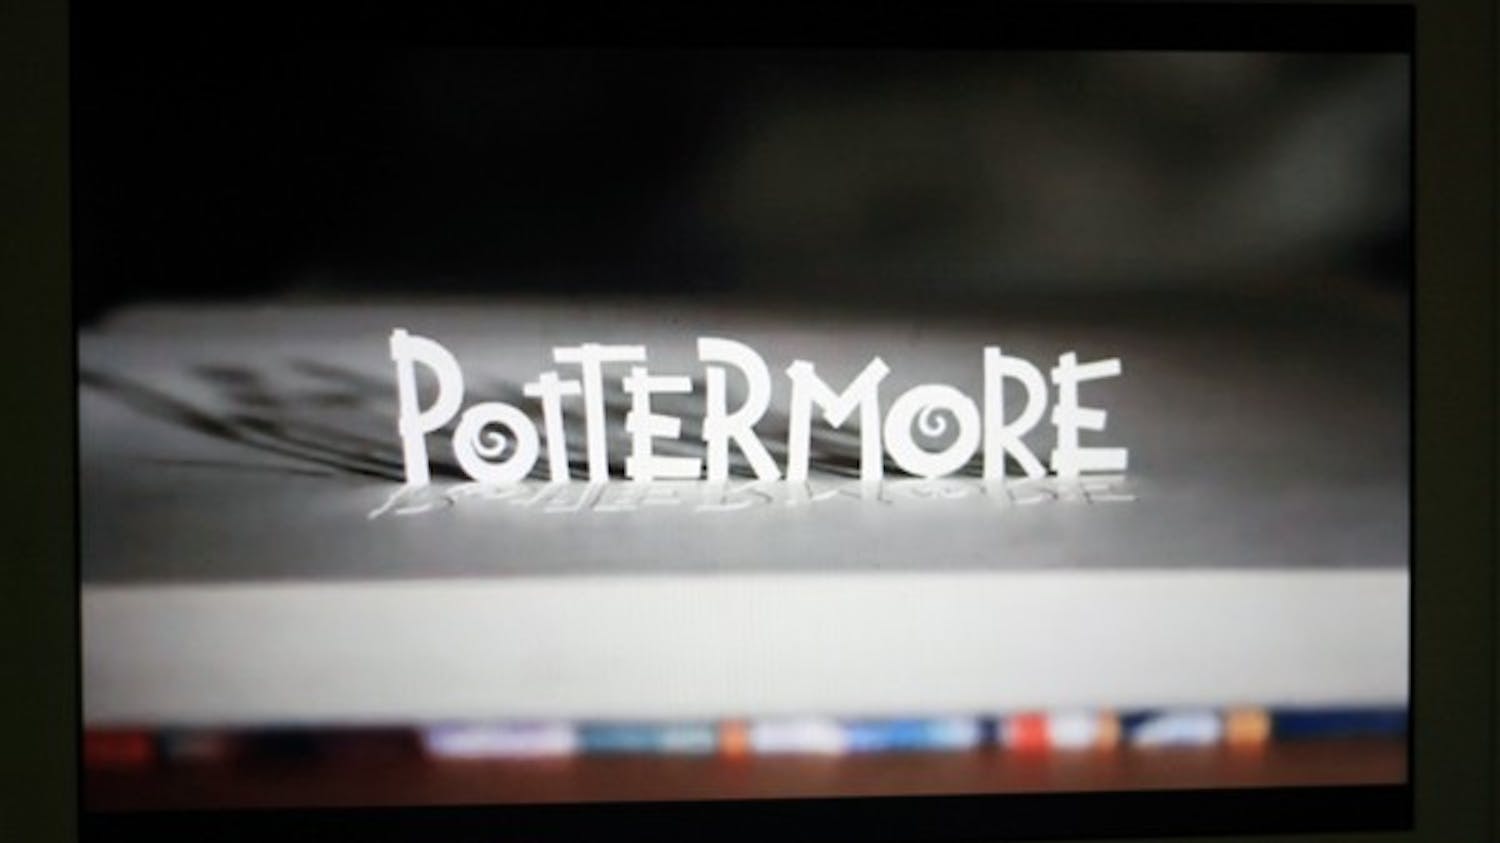 Harry Potter will live on in Pottermore: J.K.Rowling announces Harry Potter  world opening October